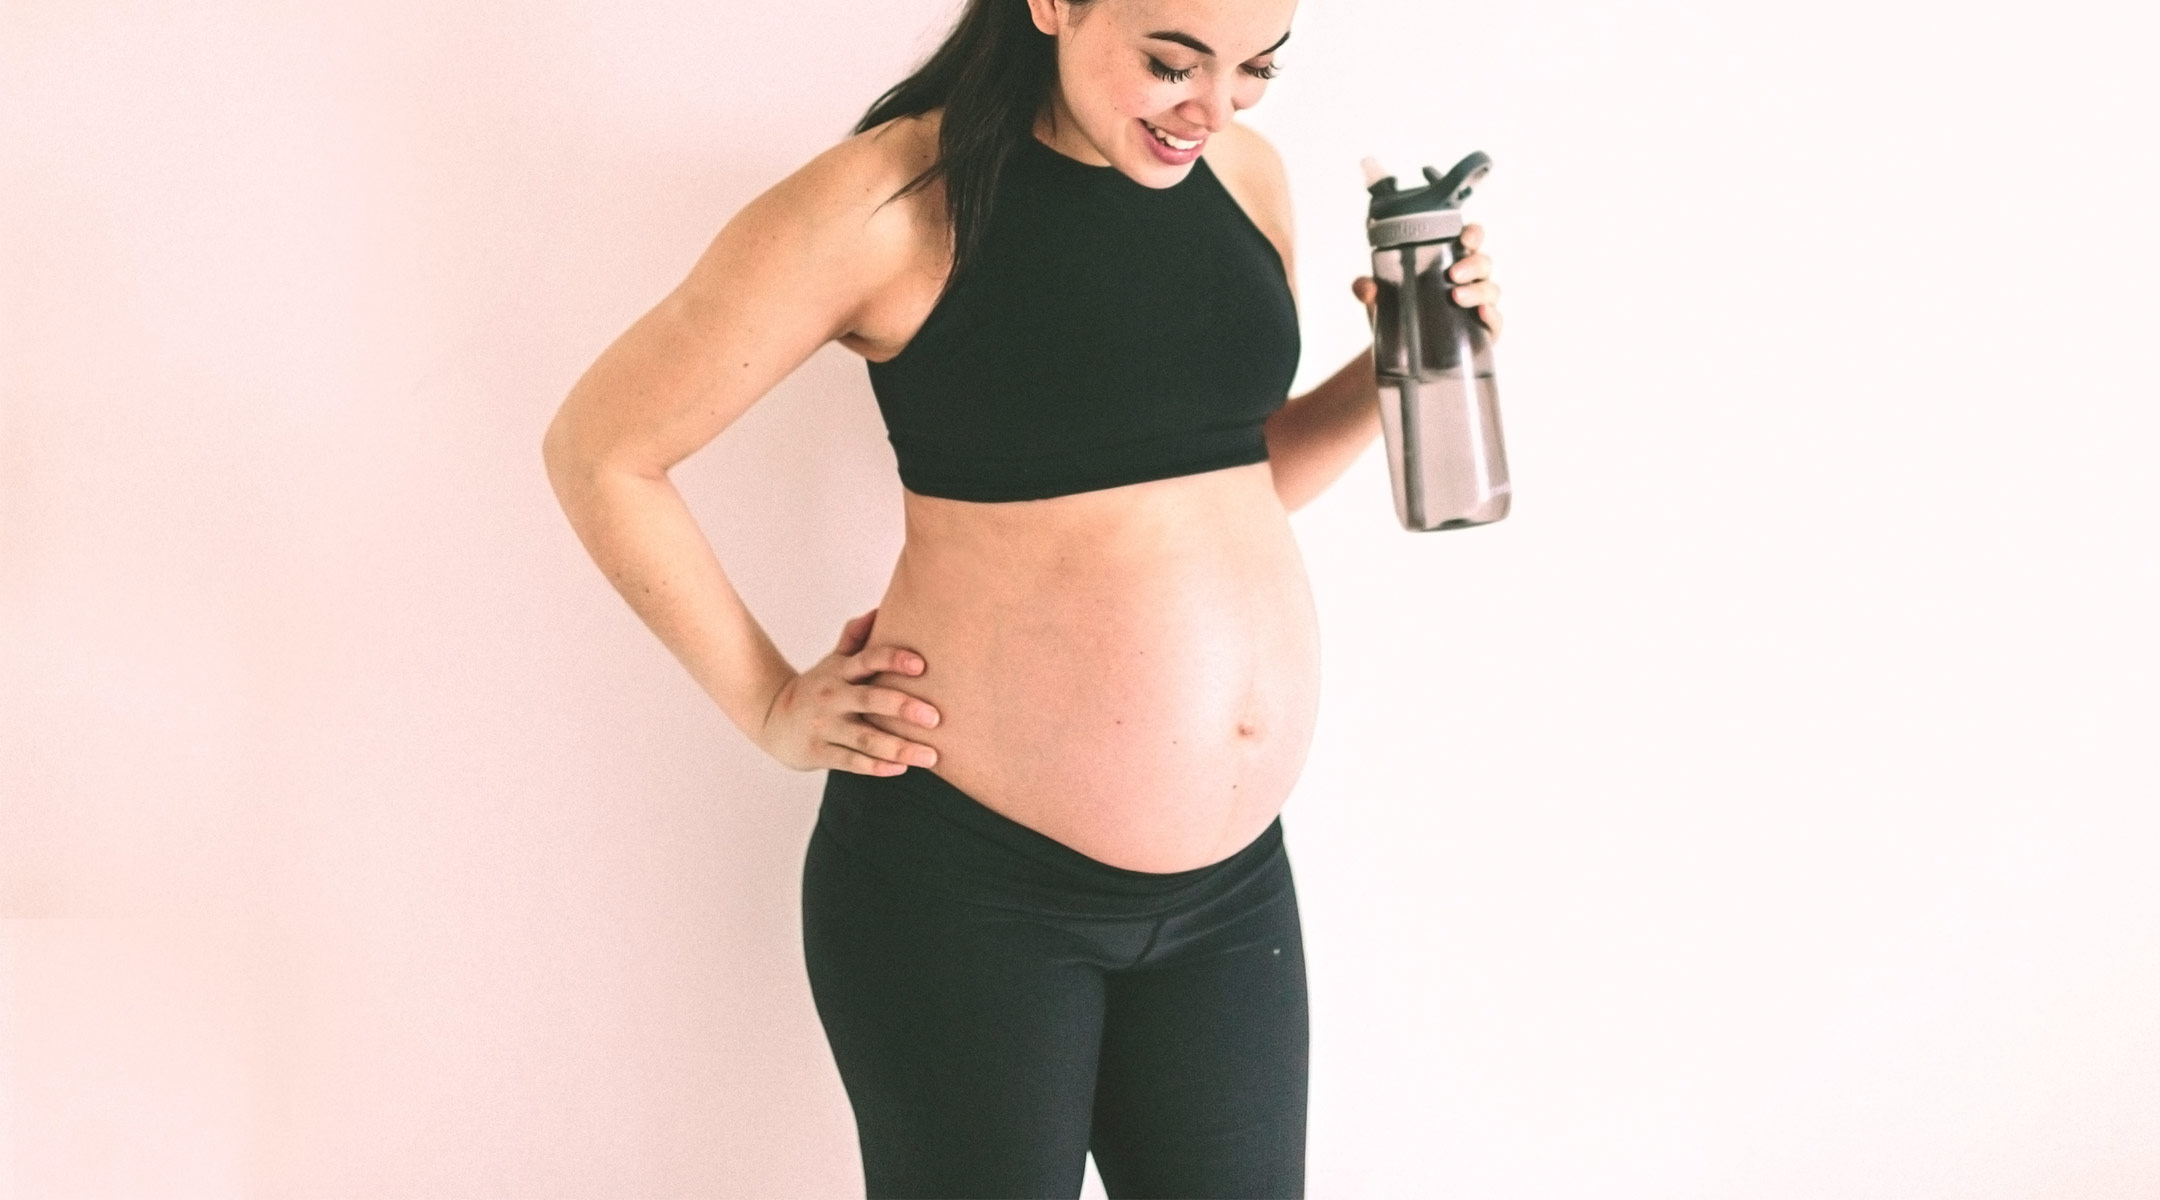 pregnant woman in workout gear carrying water bottle